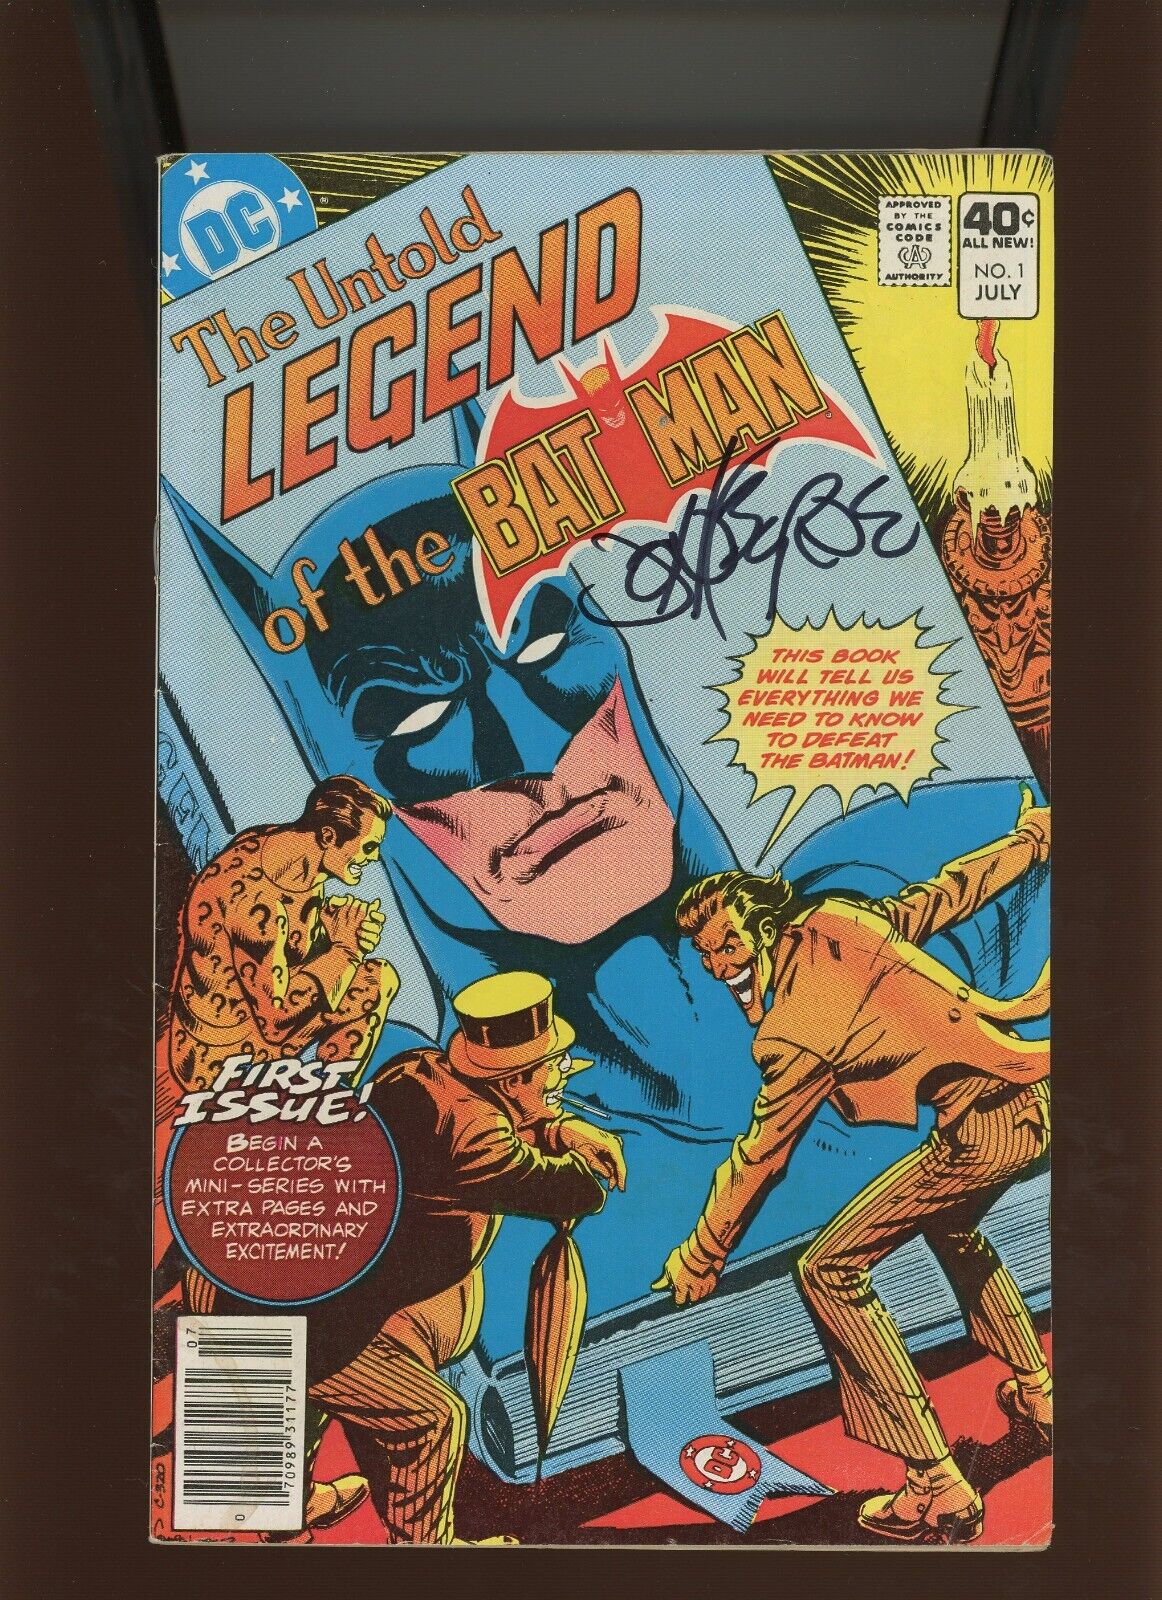 (1980) The Untold Legend of the Batman #1: SIGNED BY JOHN BYRNE (4.0)